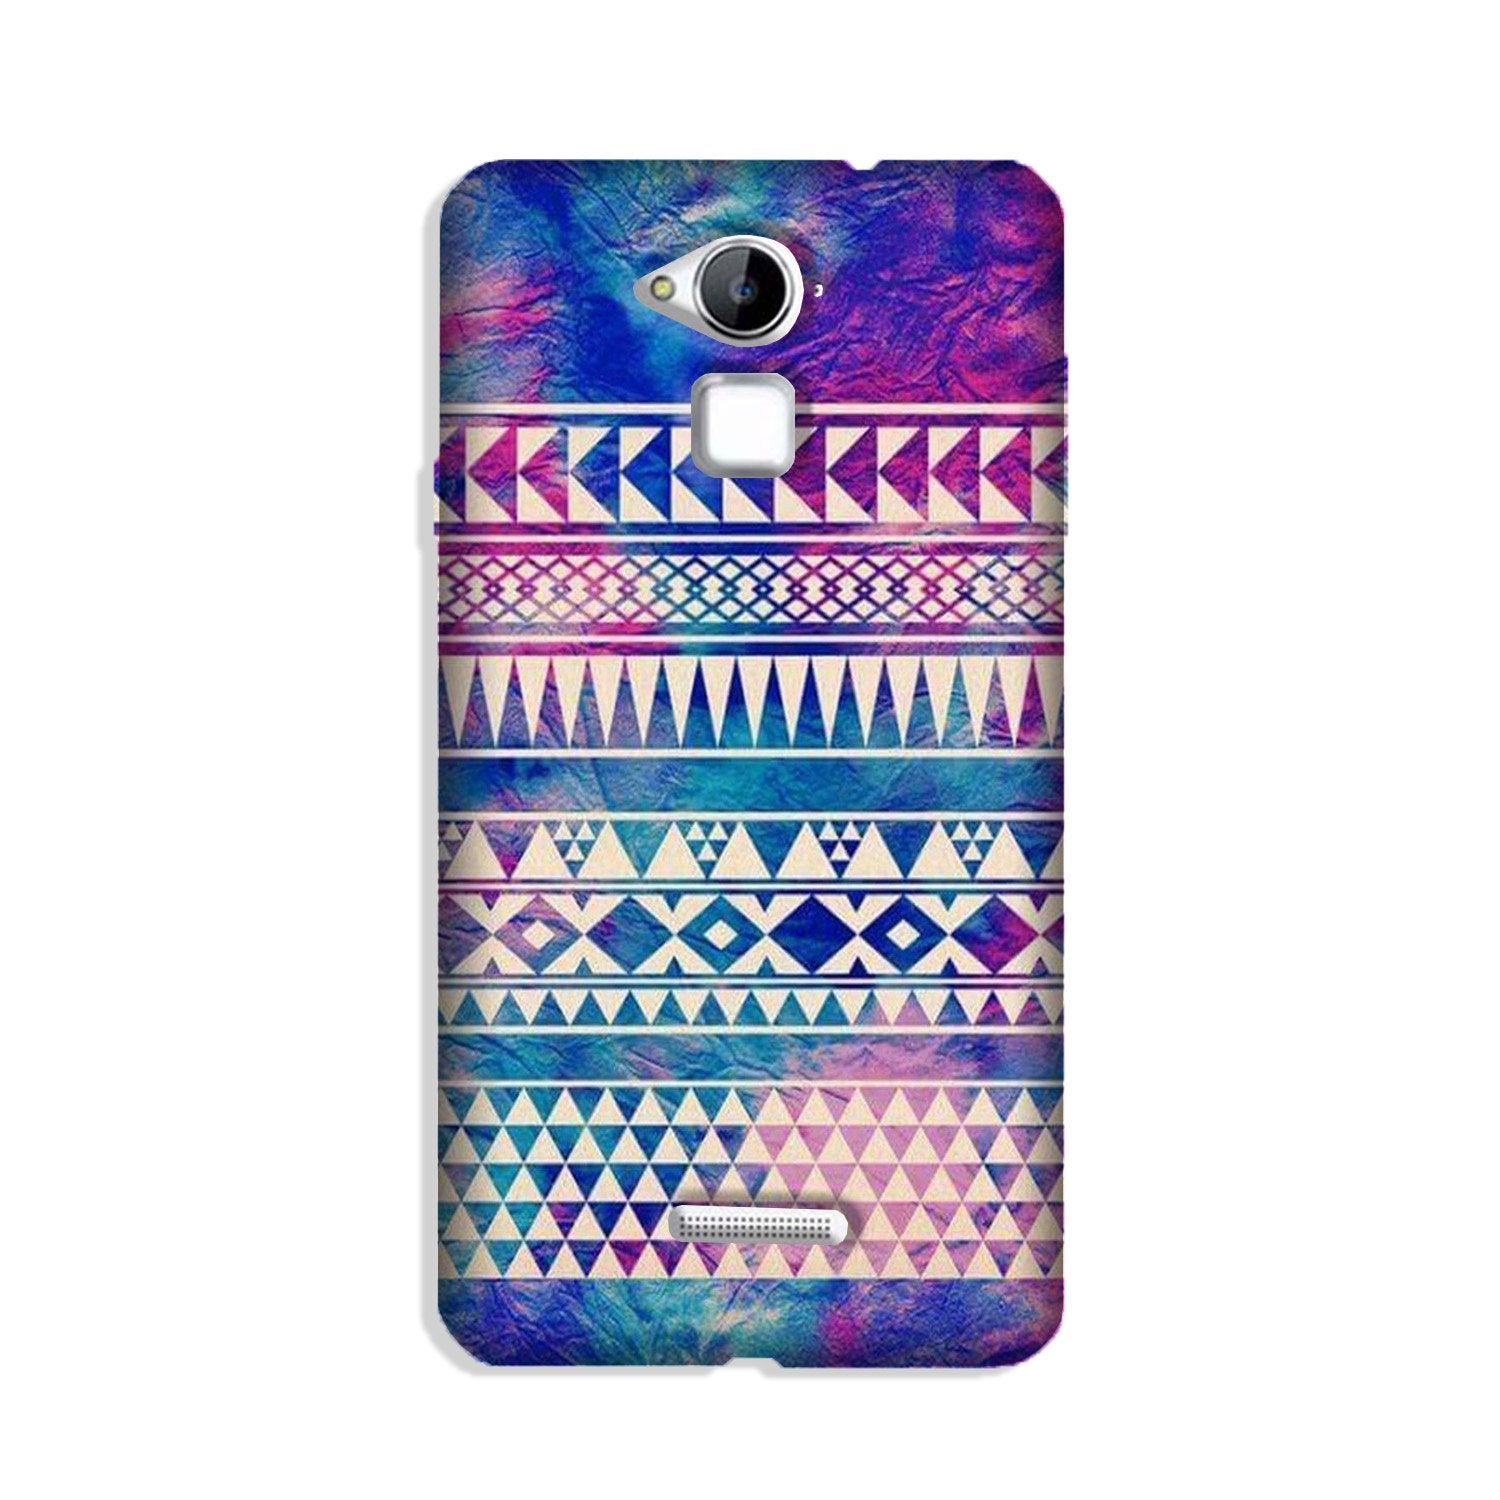 Modern Art Case for Coolpad Note 3